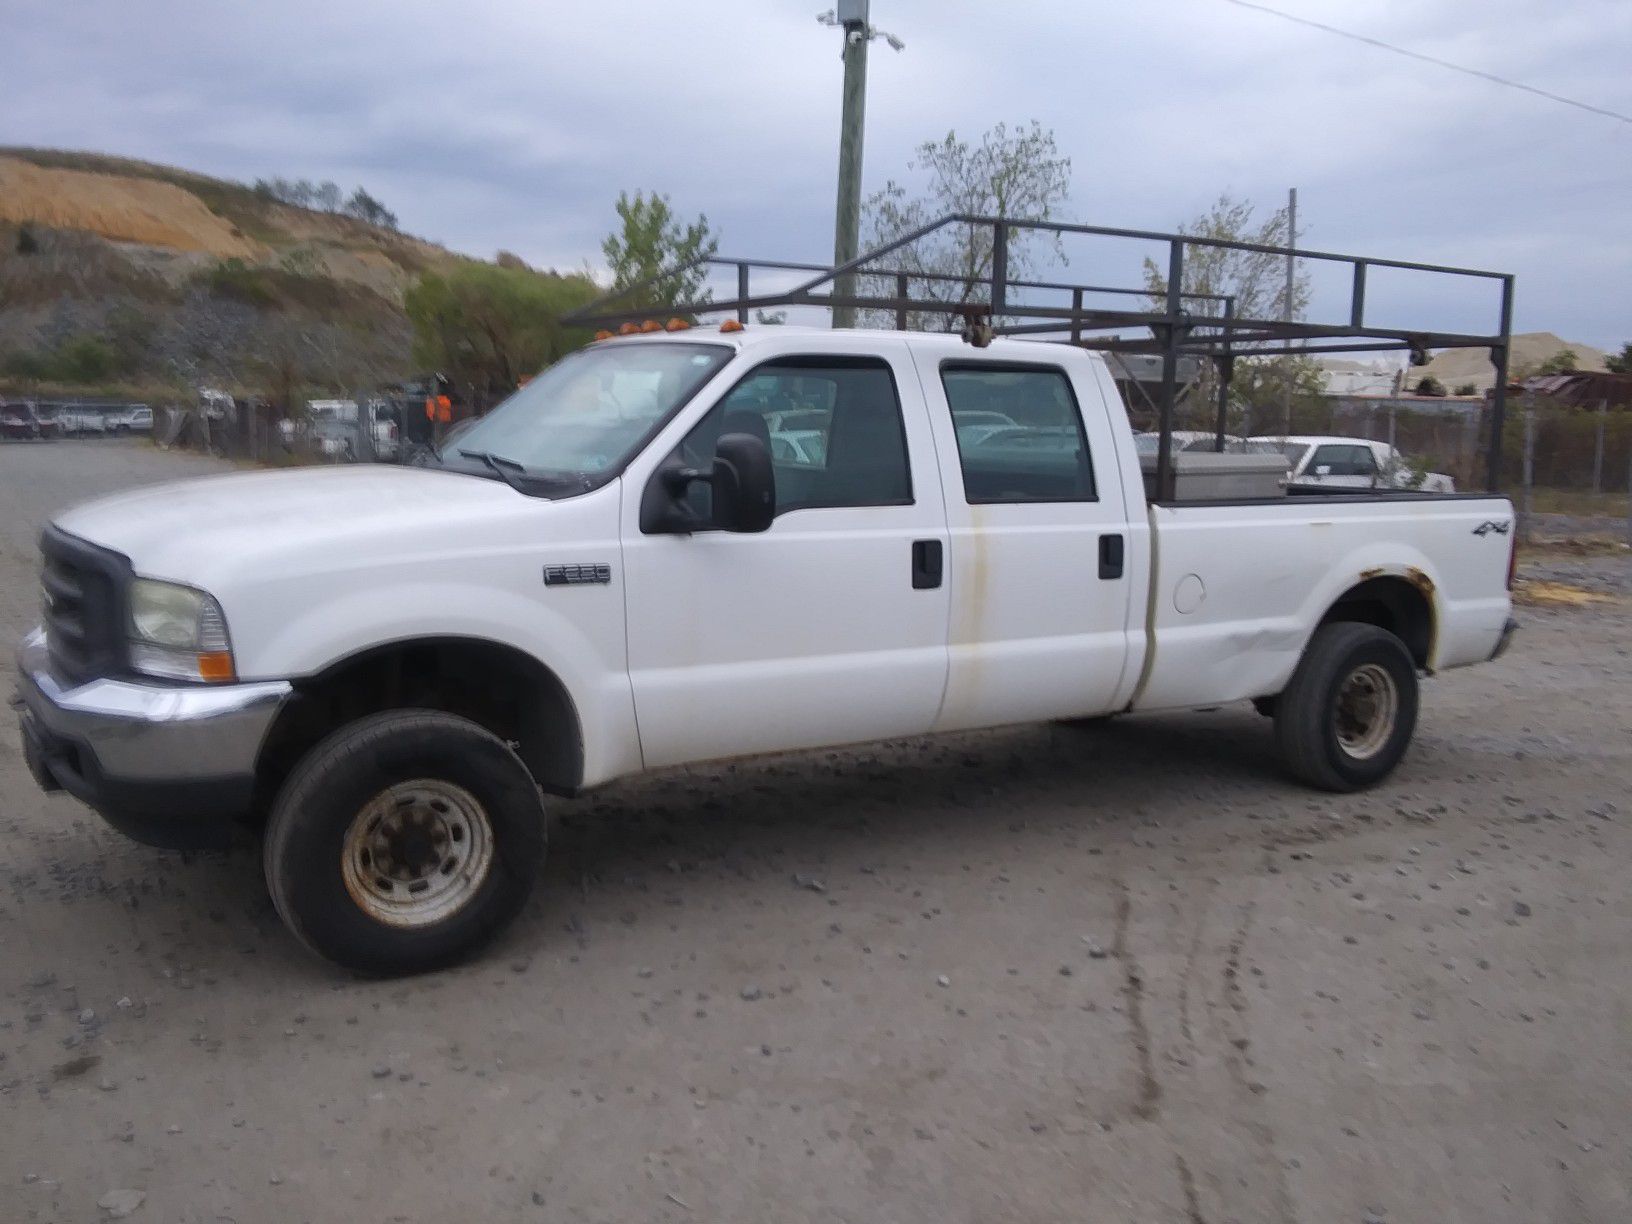 2004 Ford F250 4x4 Super Duty 200k miles runs and drives!!! Virginia inspected!!!